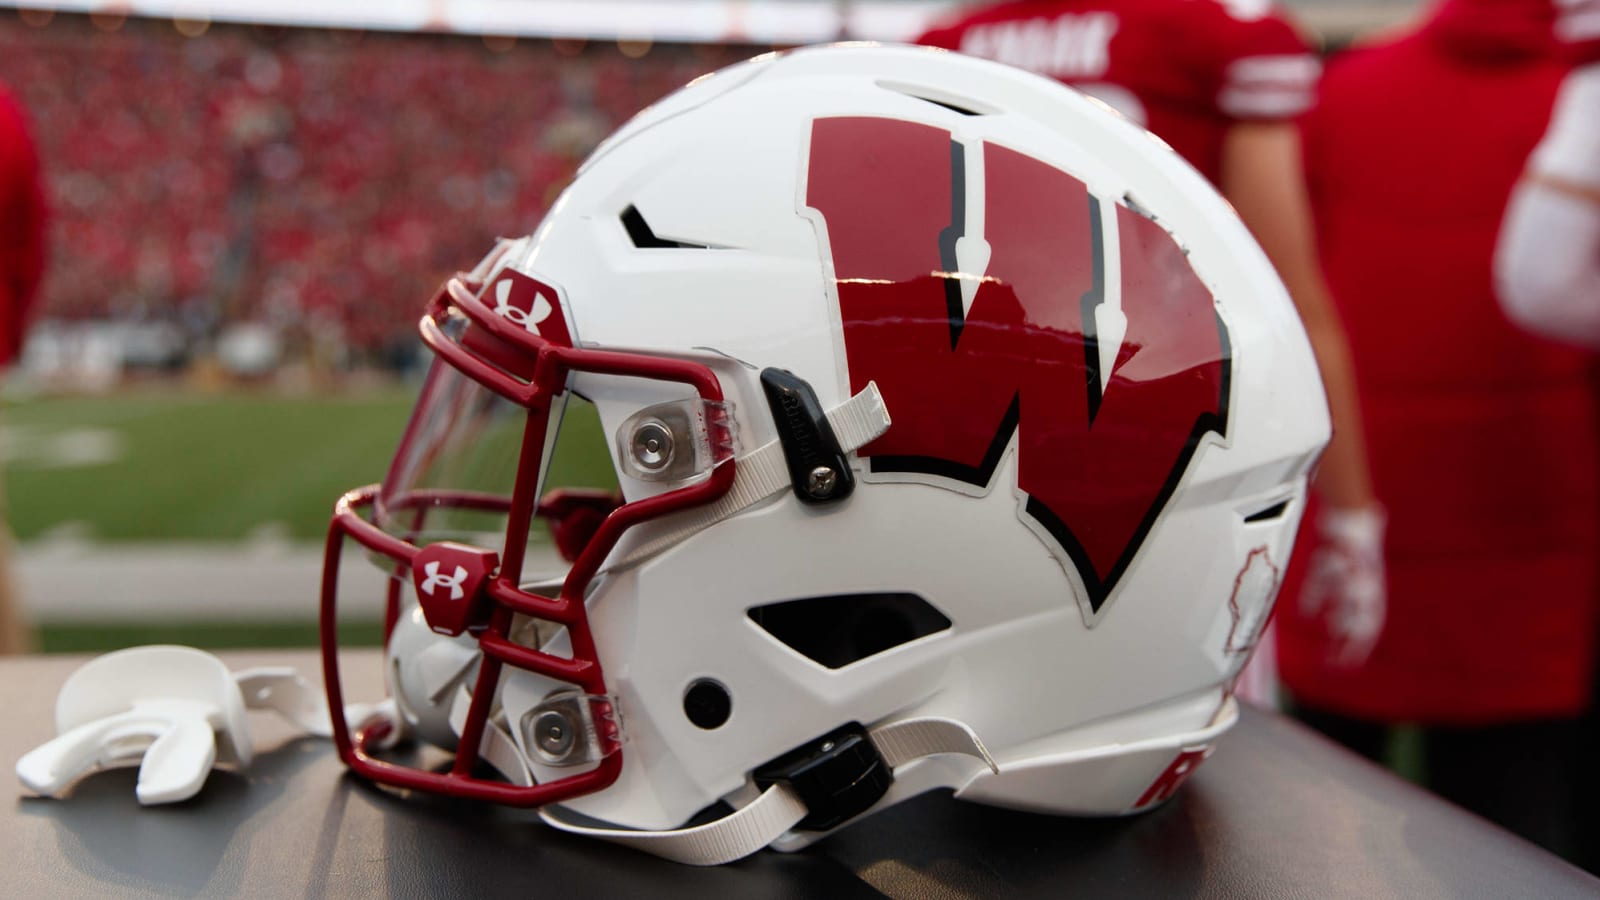 Wisconsin-Nebraska canceled due to positive COVID tests